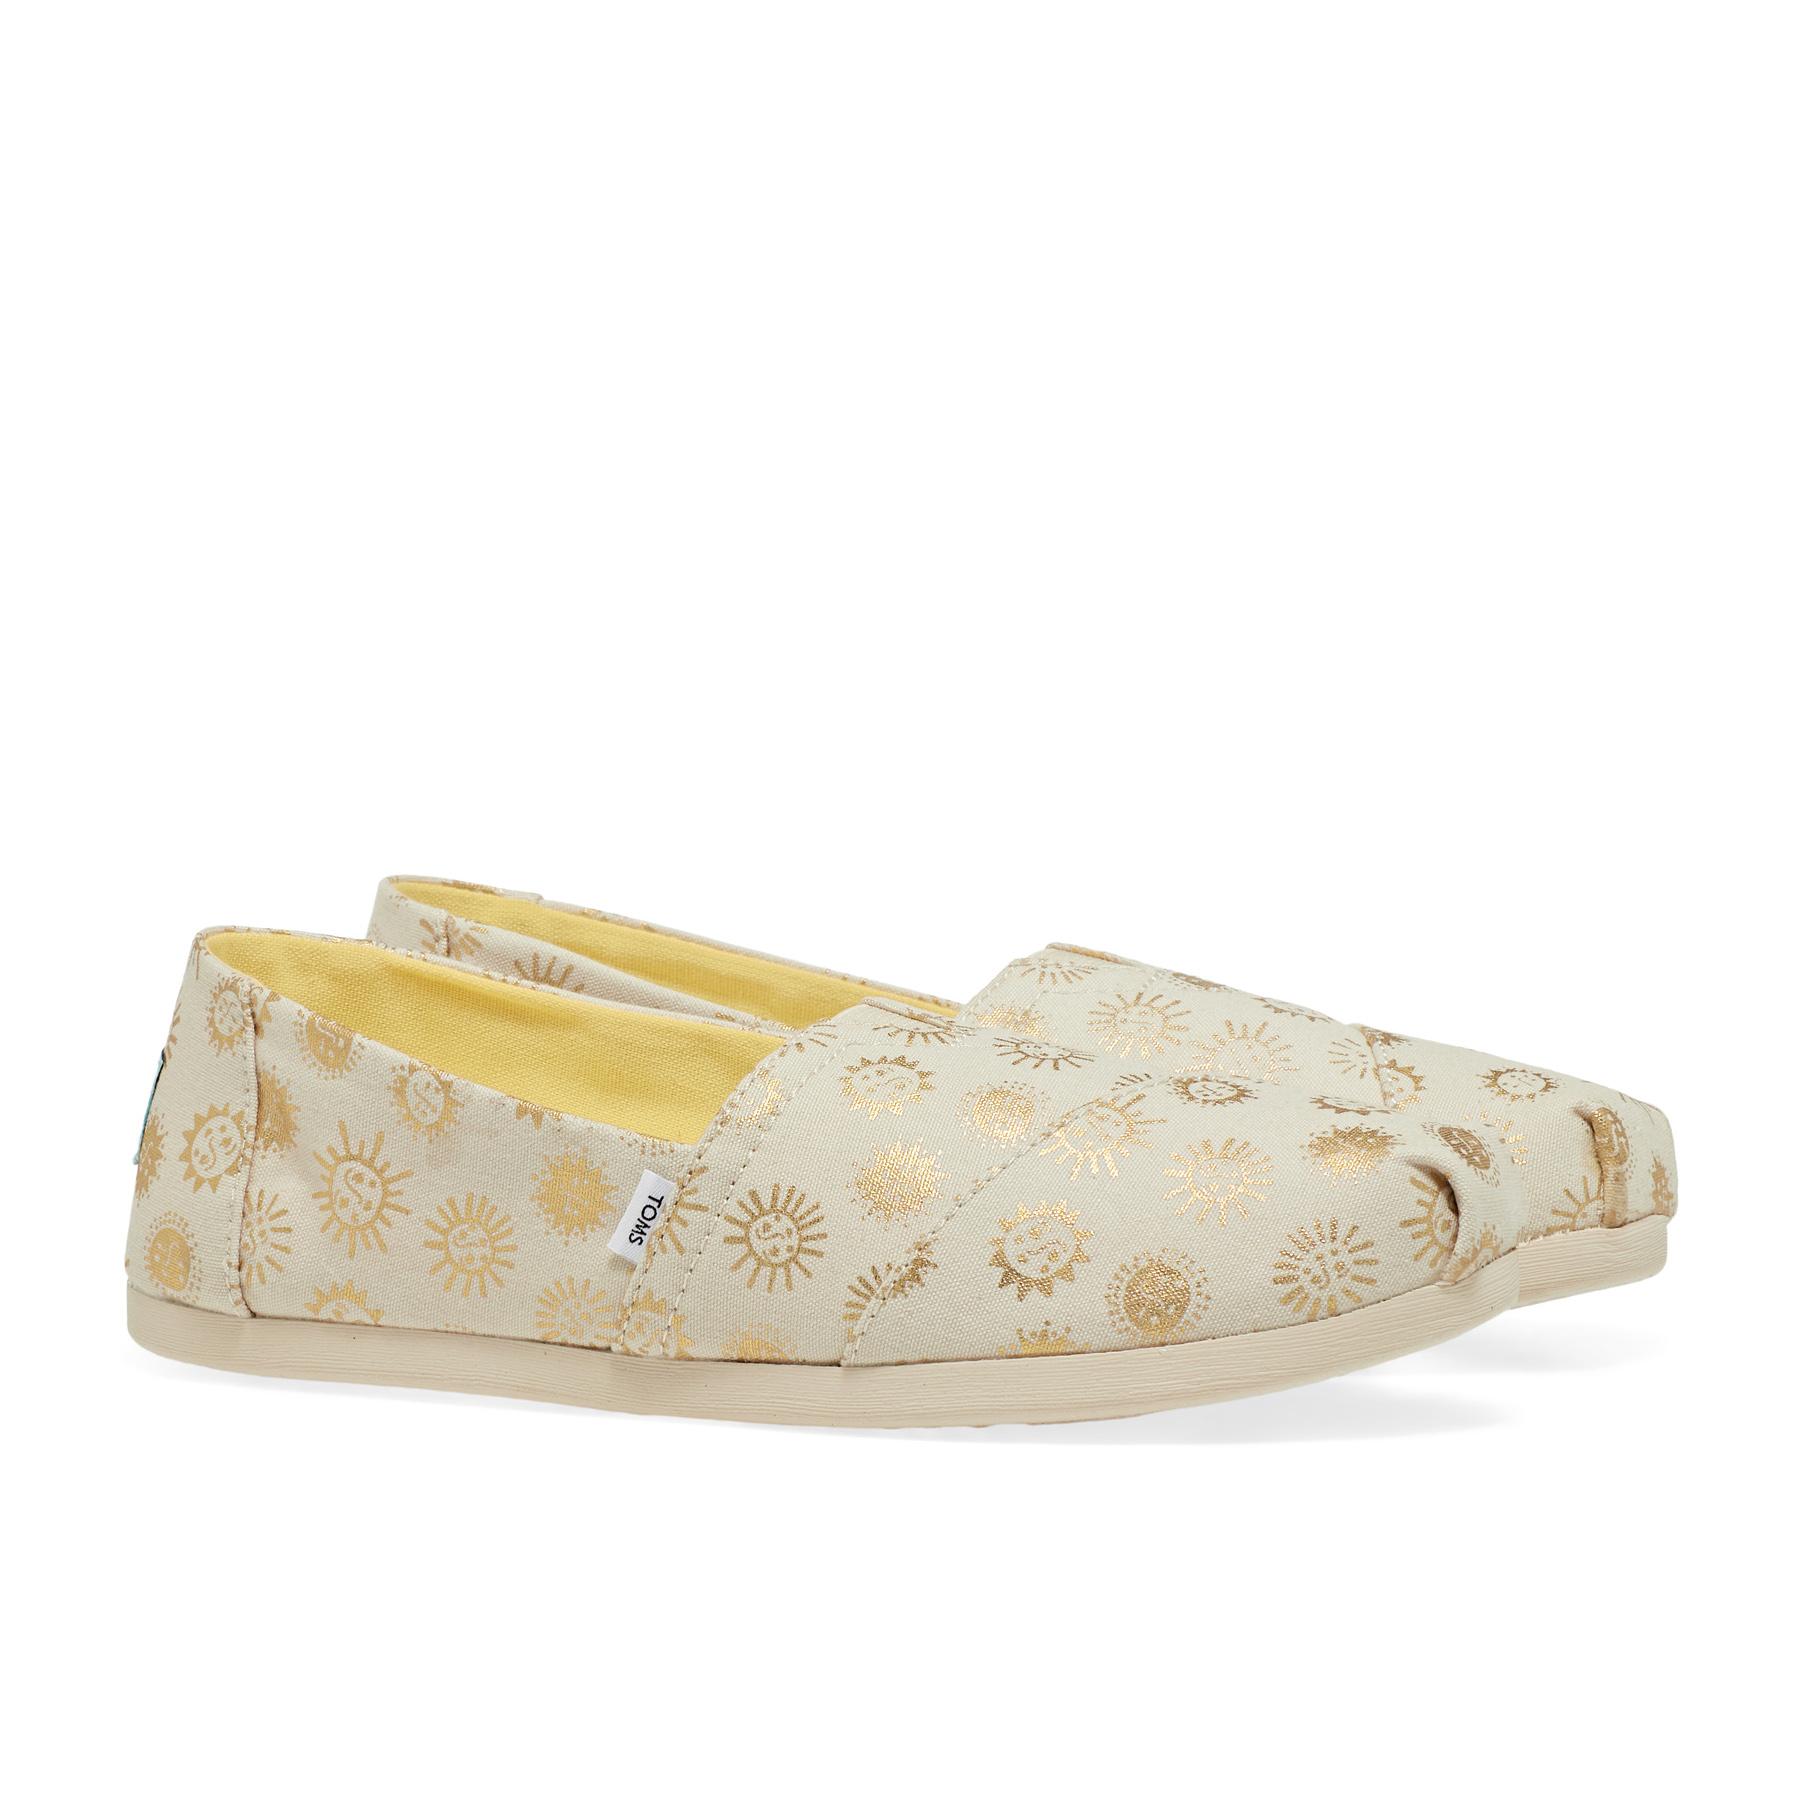 TOMS Foil Sunny Days Alpargata Slip On Trainers in Natural | Lyst